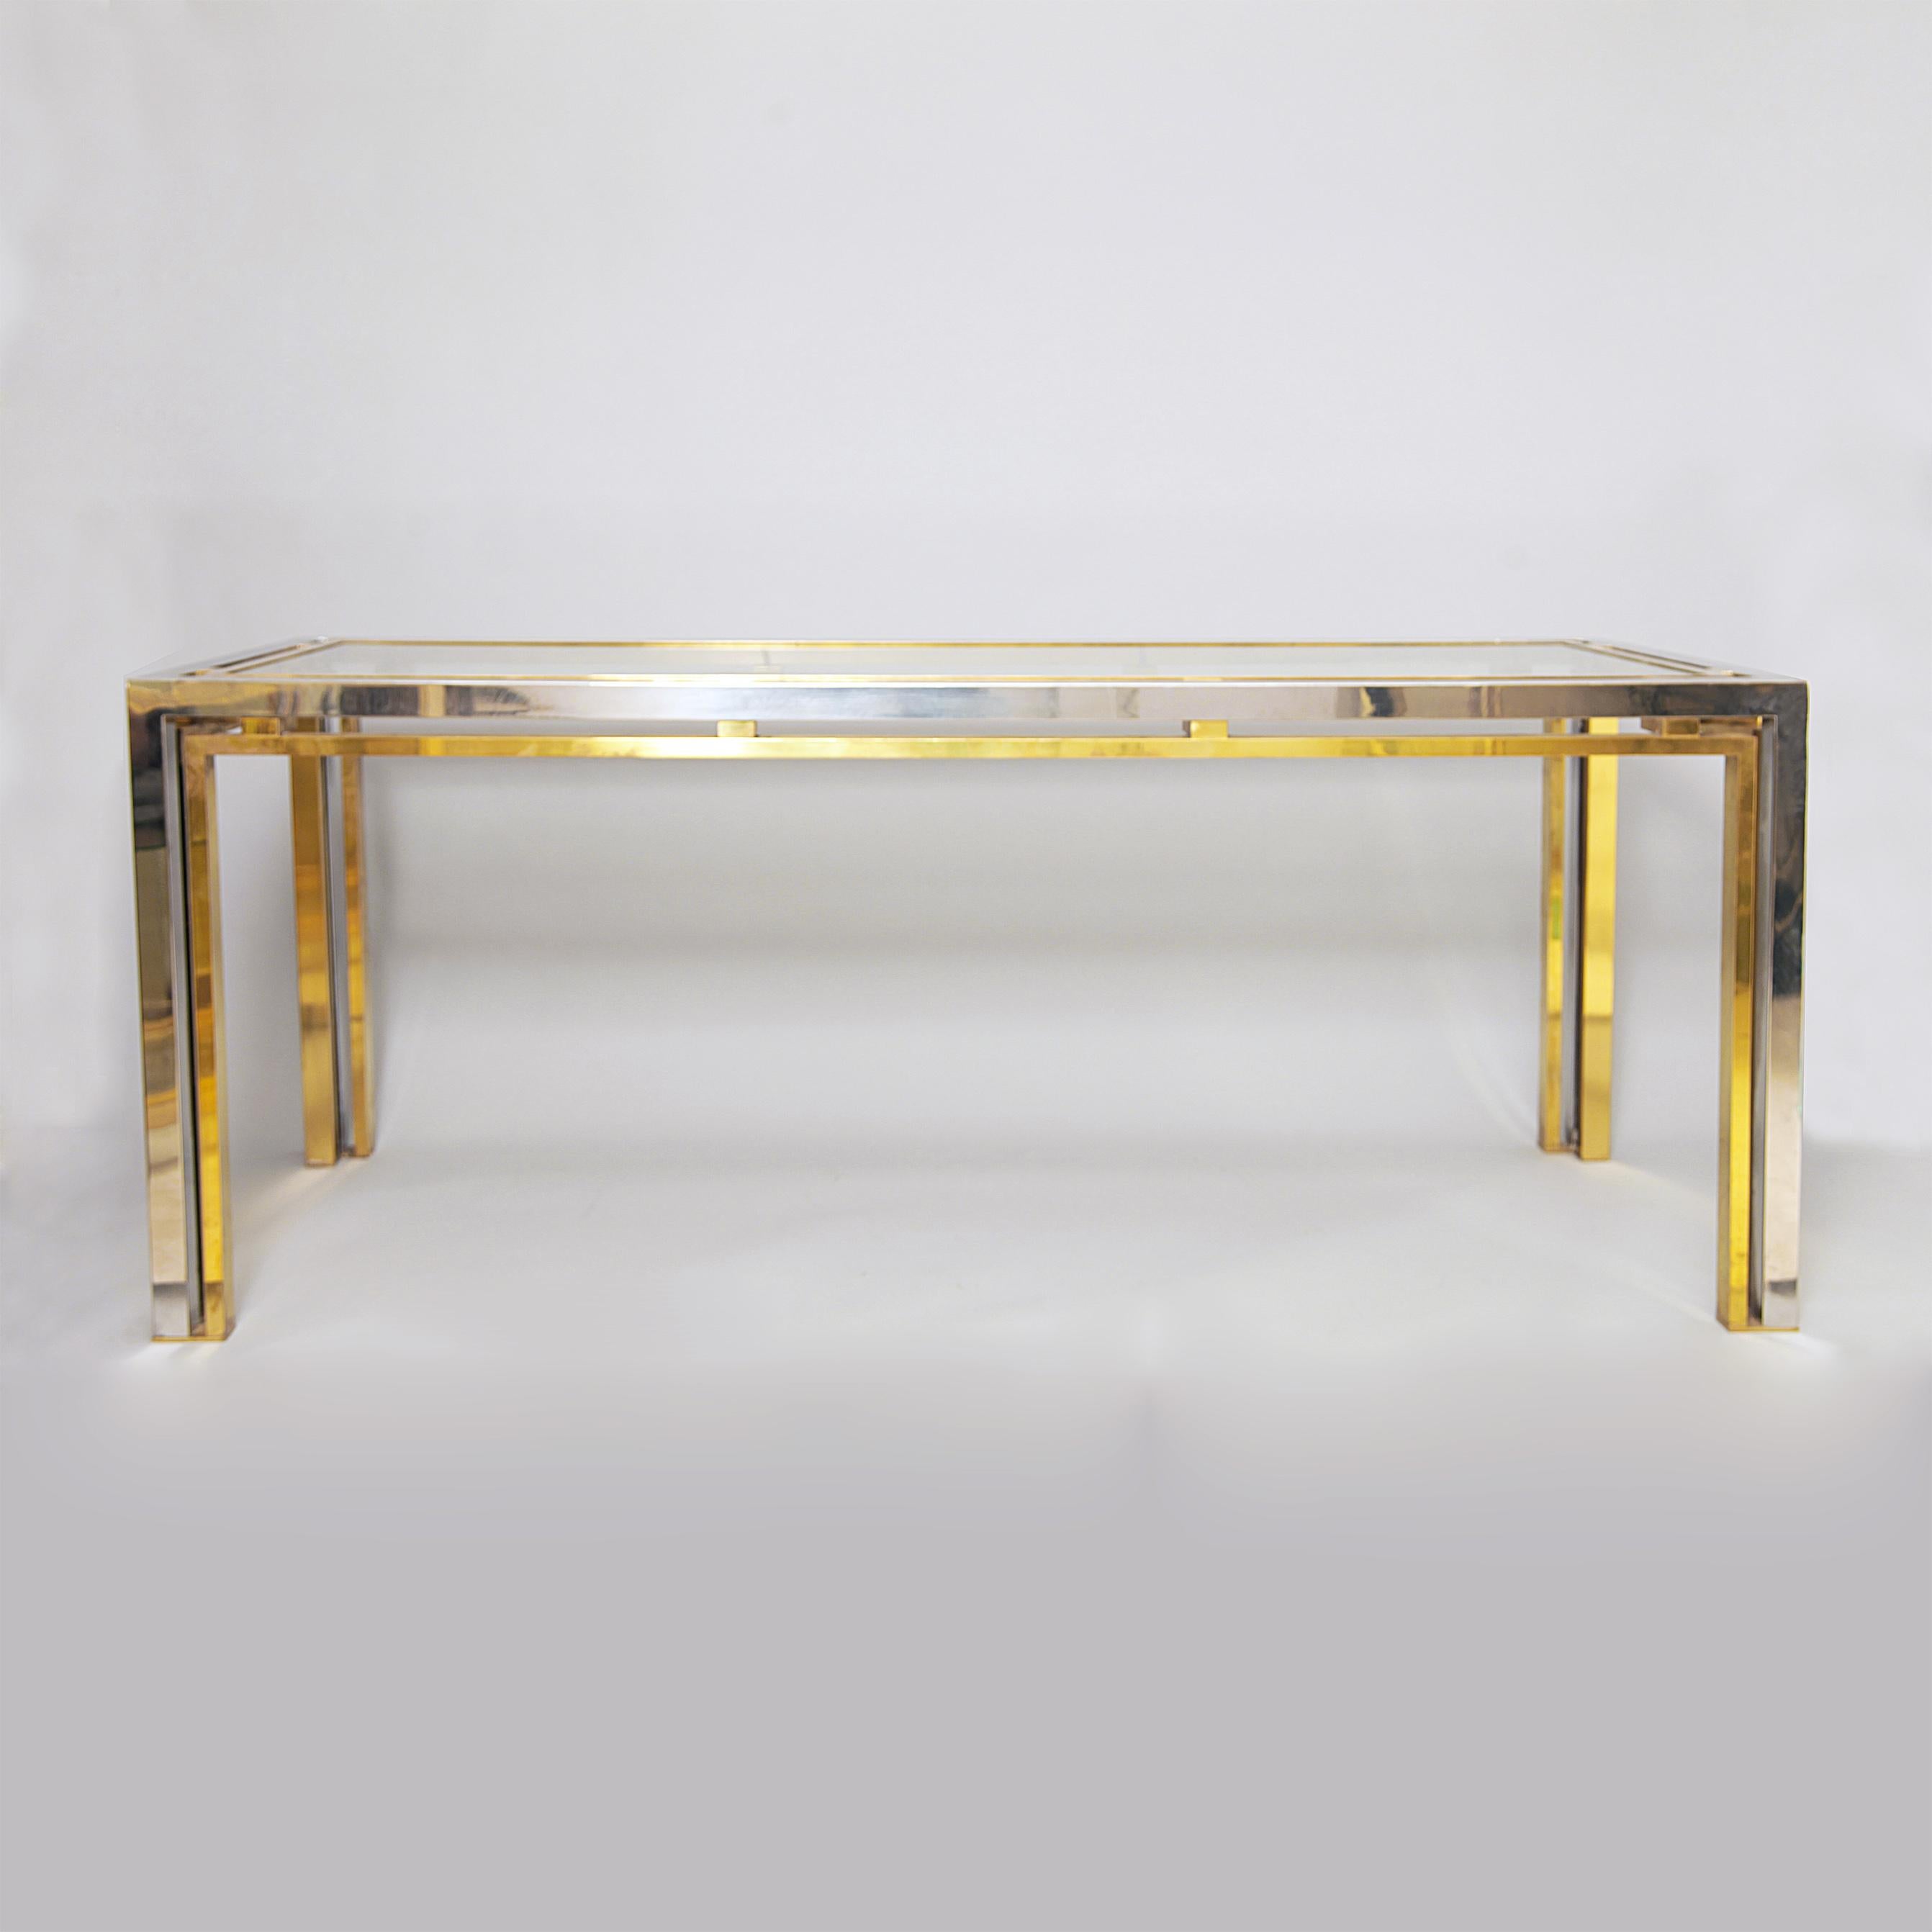 Chrome and brass rectangular console table or desk attributed to Romeo Rega. Clear glass top. This amazingly elegant piece can either be used as a console table or an office desk, either way it will look great!